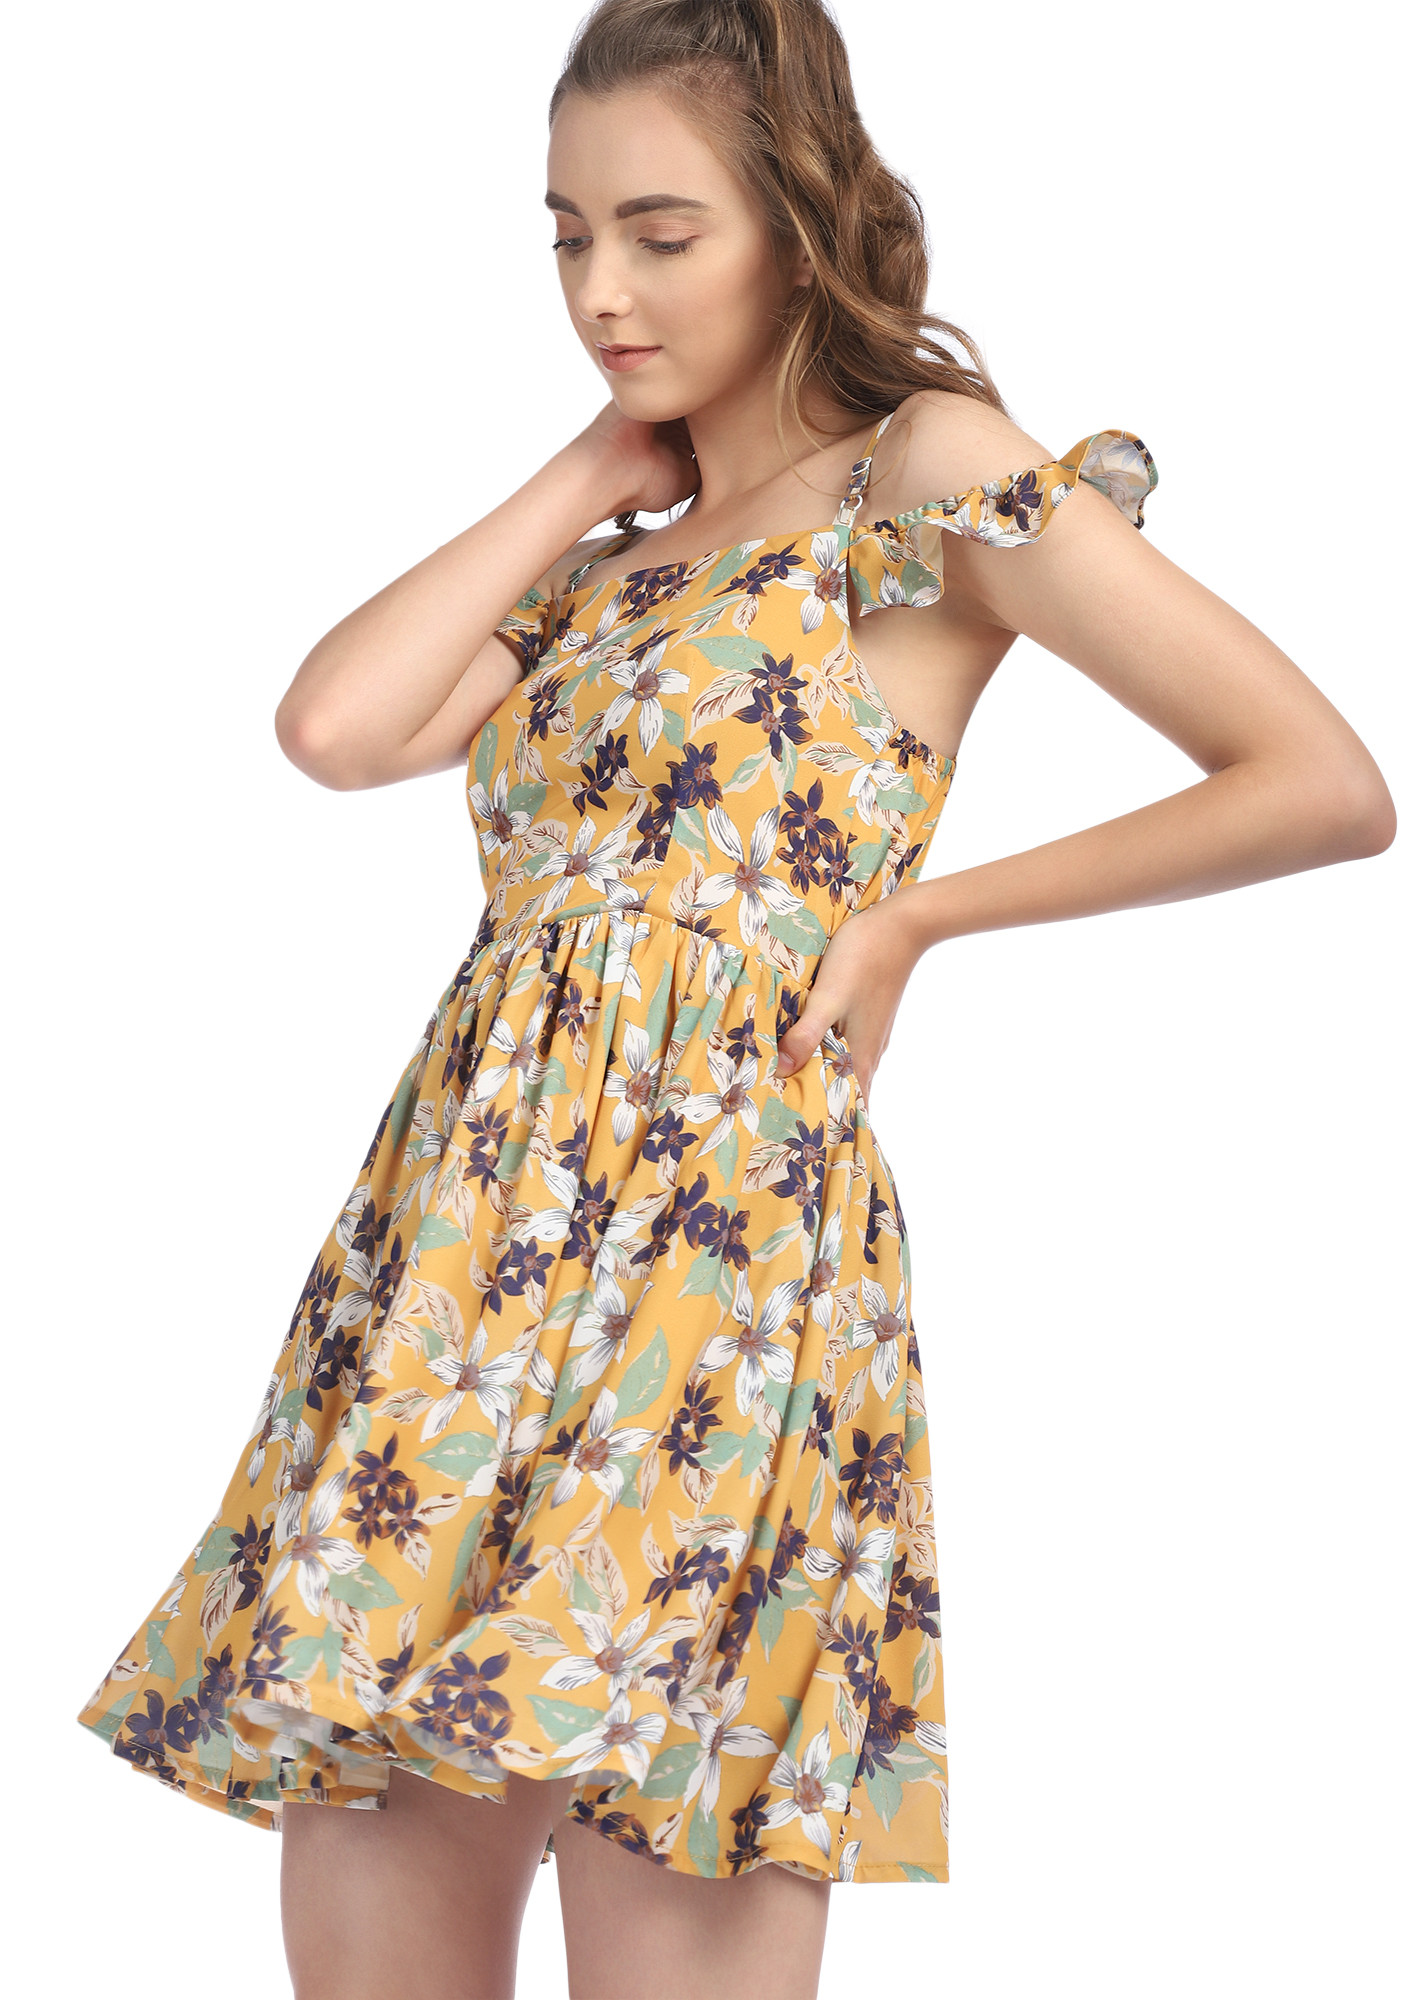 LIVE HAPPY AND PRETTY YELLOW SKATER DRESS